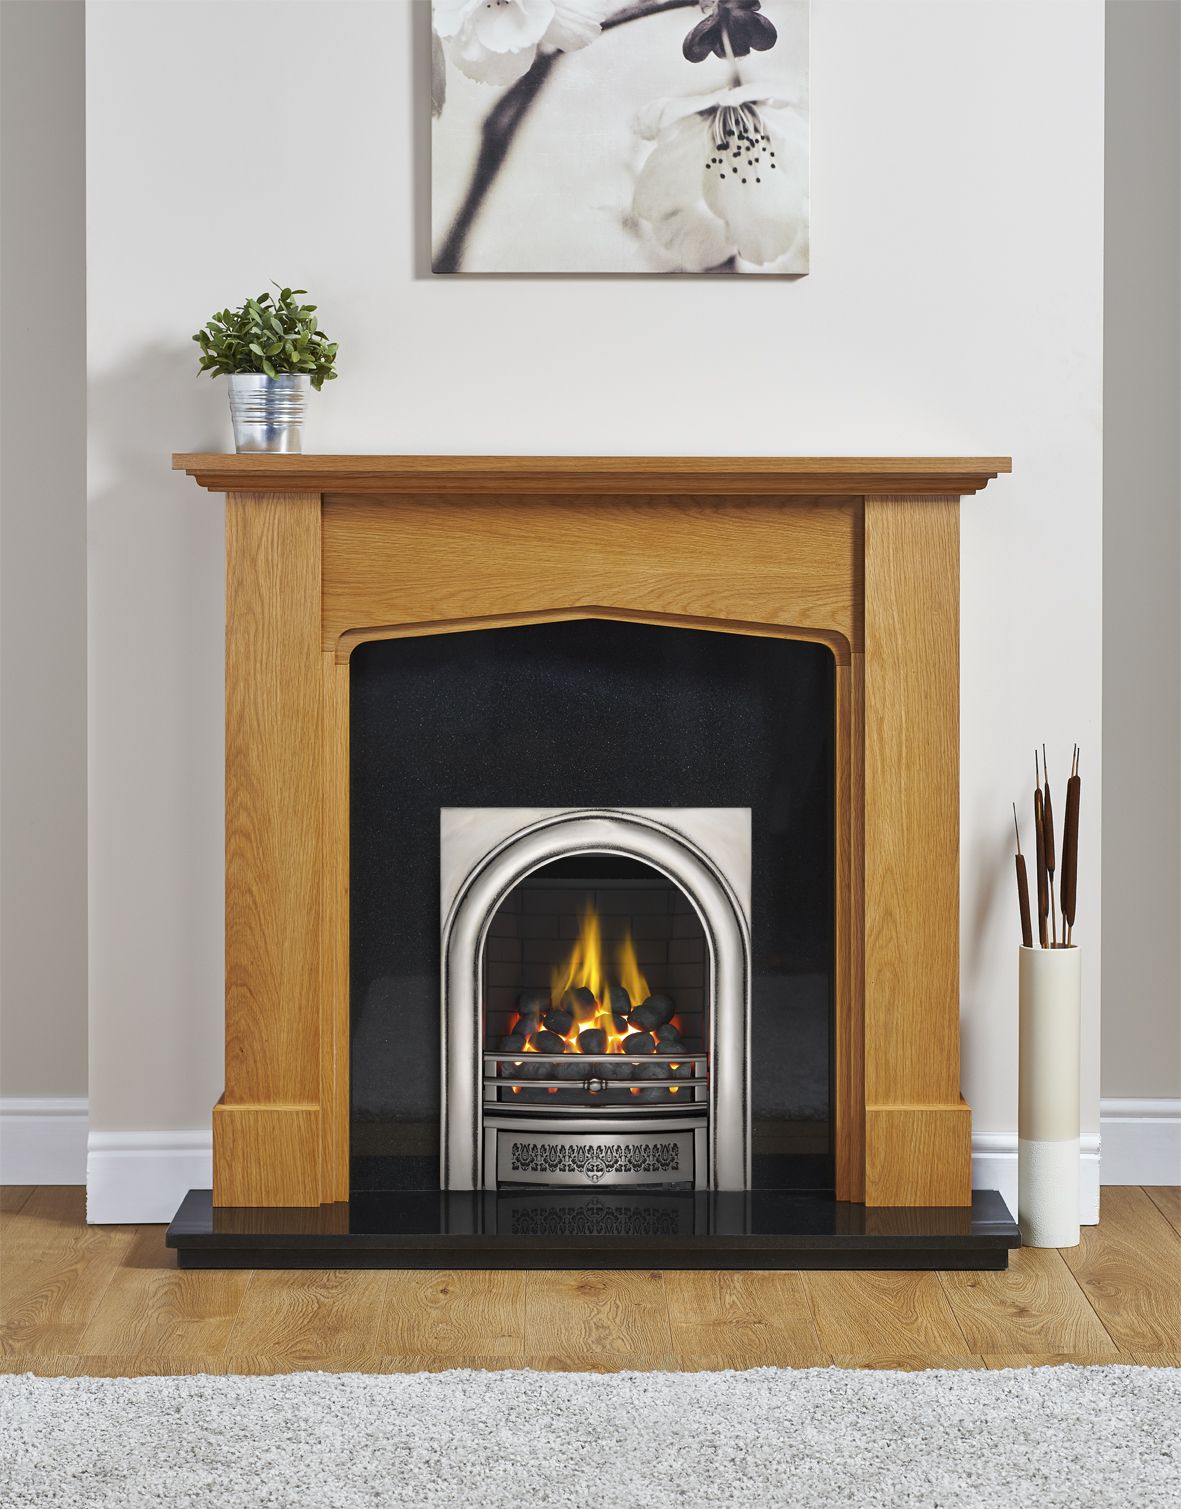 Cast Iron Electric Fireplace Beautiful the Full Depth is One Of the Best Deep Radiant Inset Gas